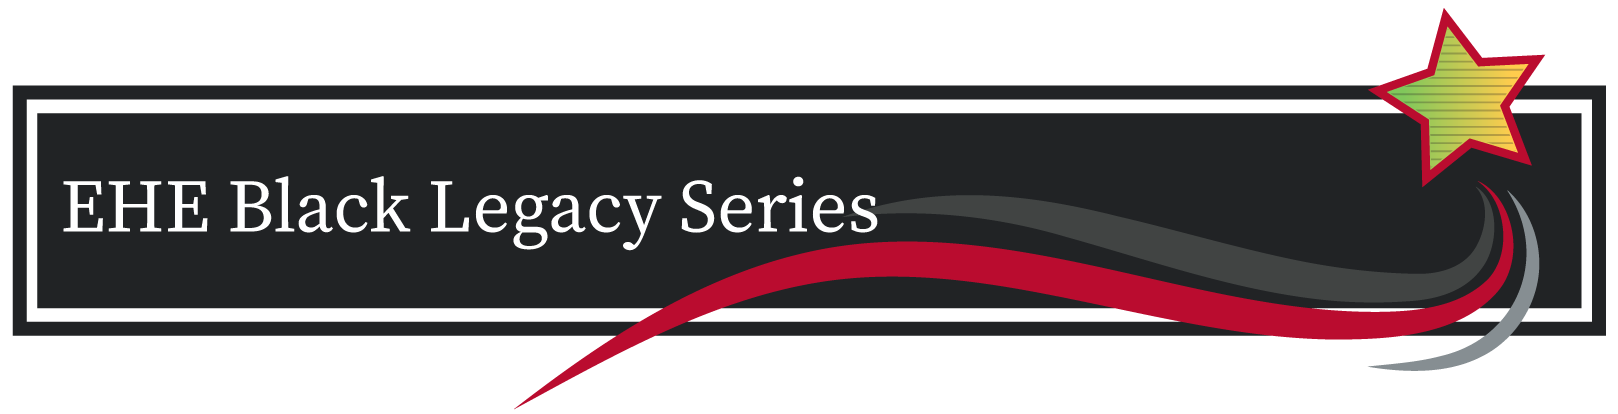 EHE Black Legacy Series banner with black box and red, green and yellow legacy star